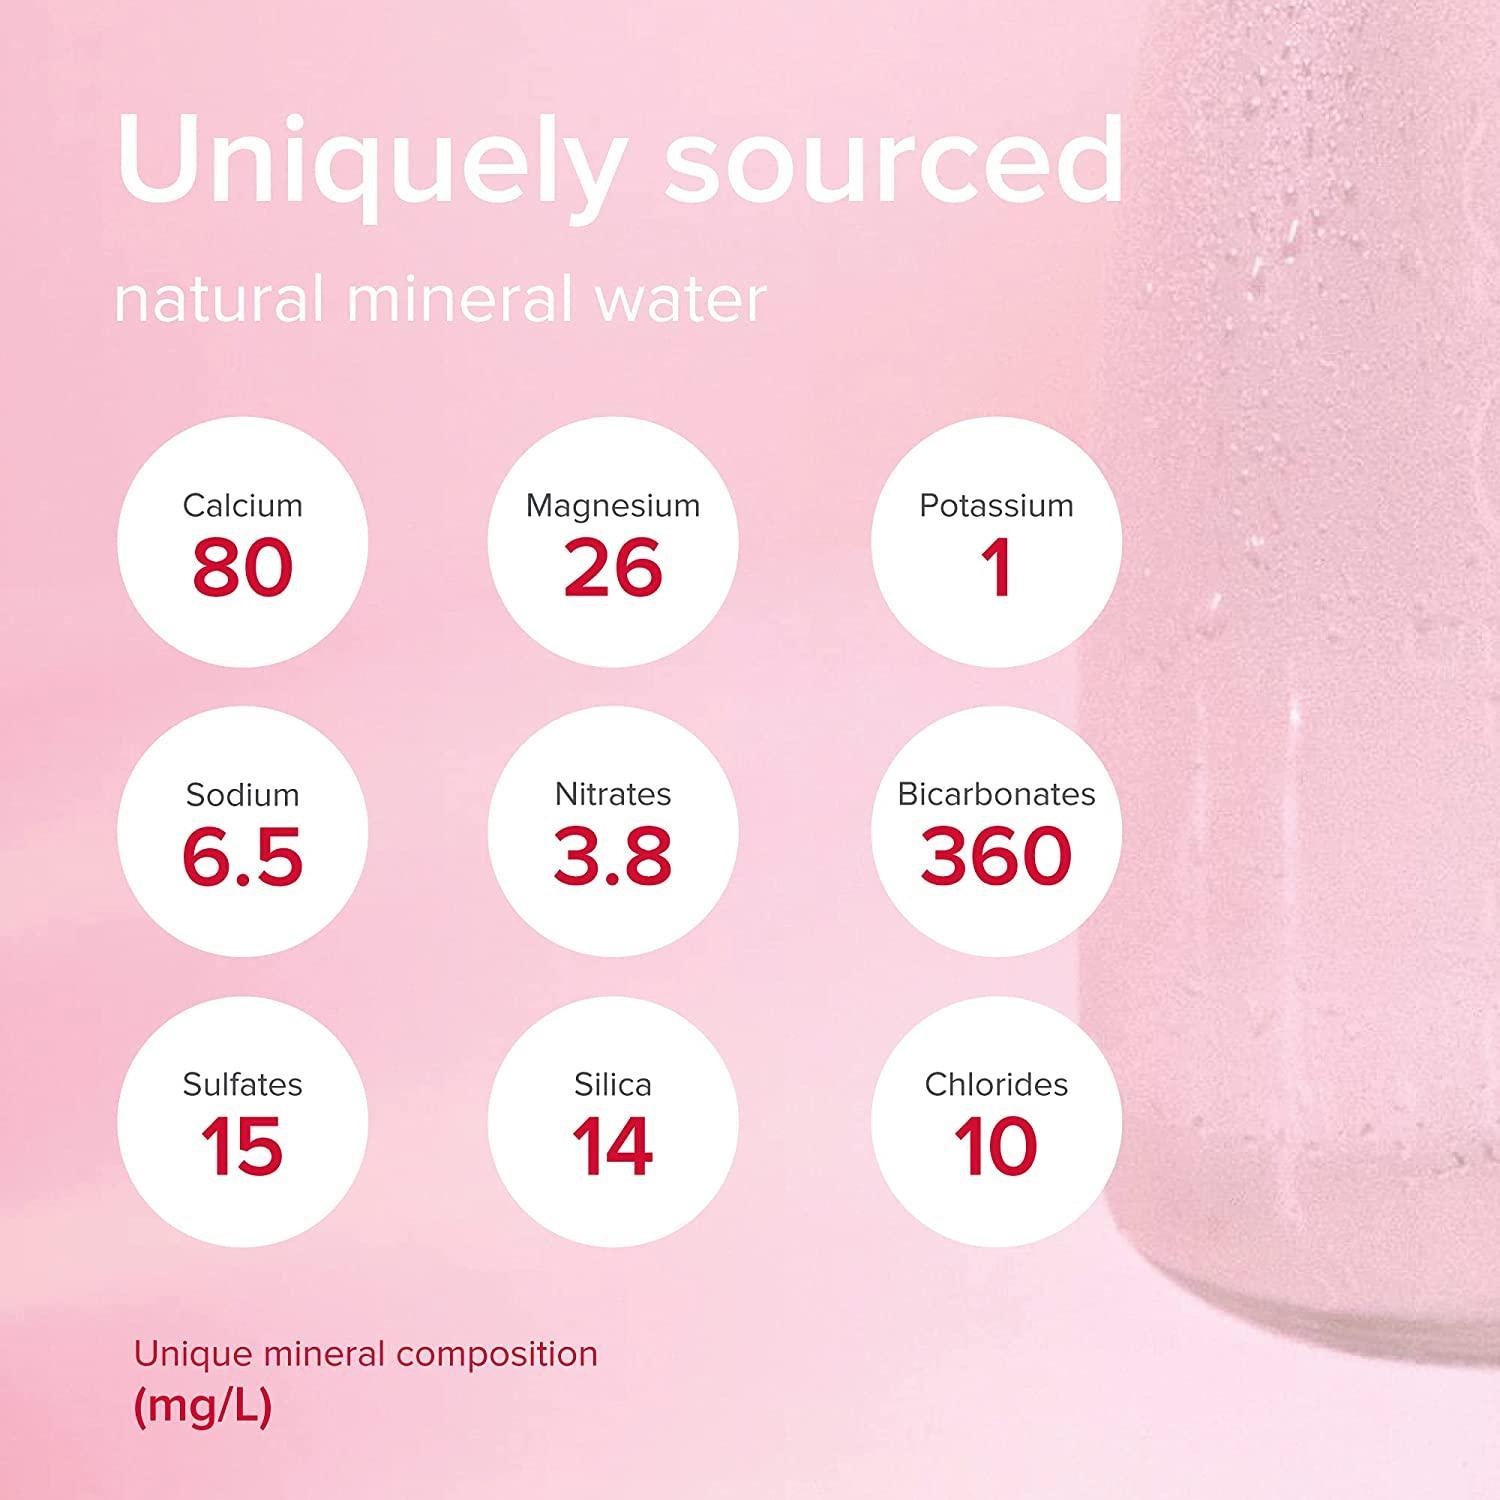 Evian Natural Mineral Water Glass Bottle, 12 x 750ml (Imported) - Super 7 Mart